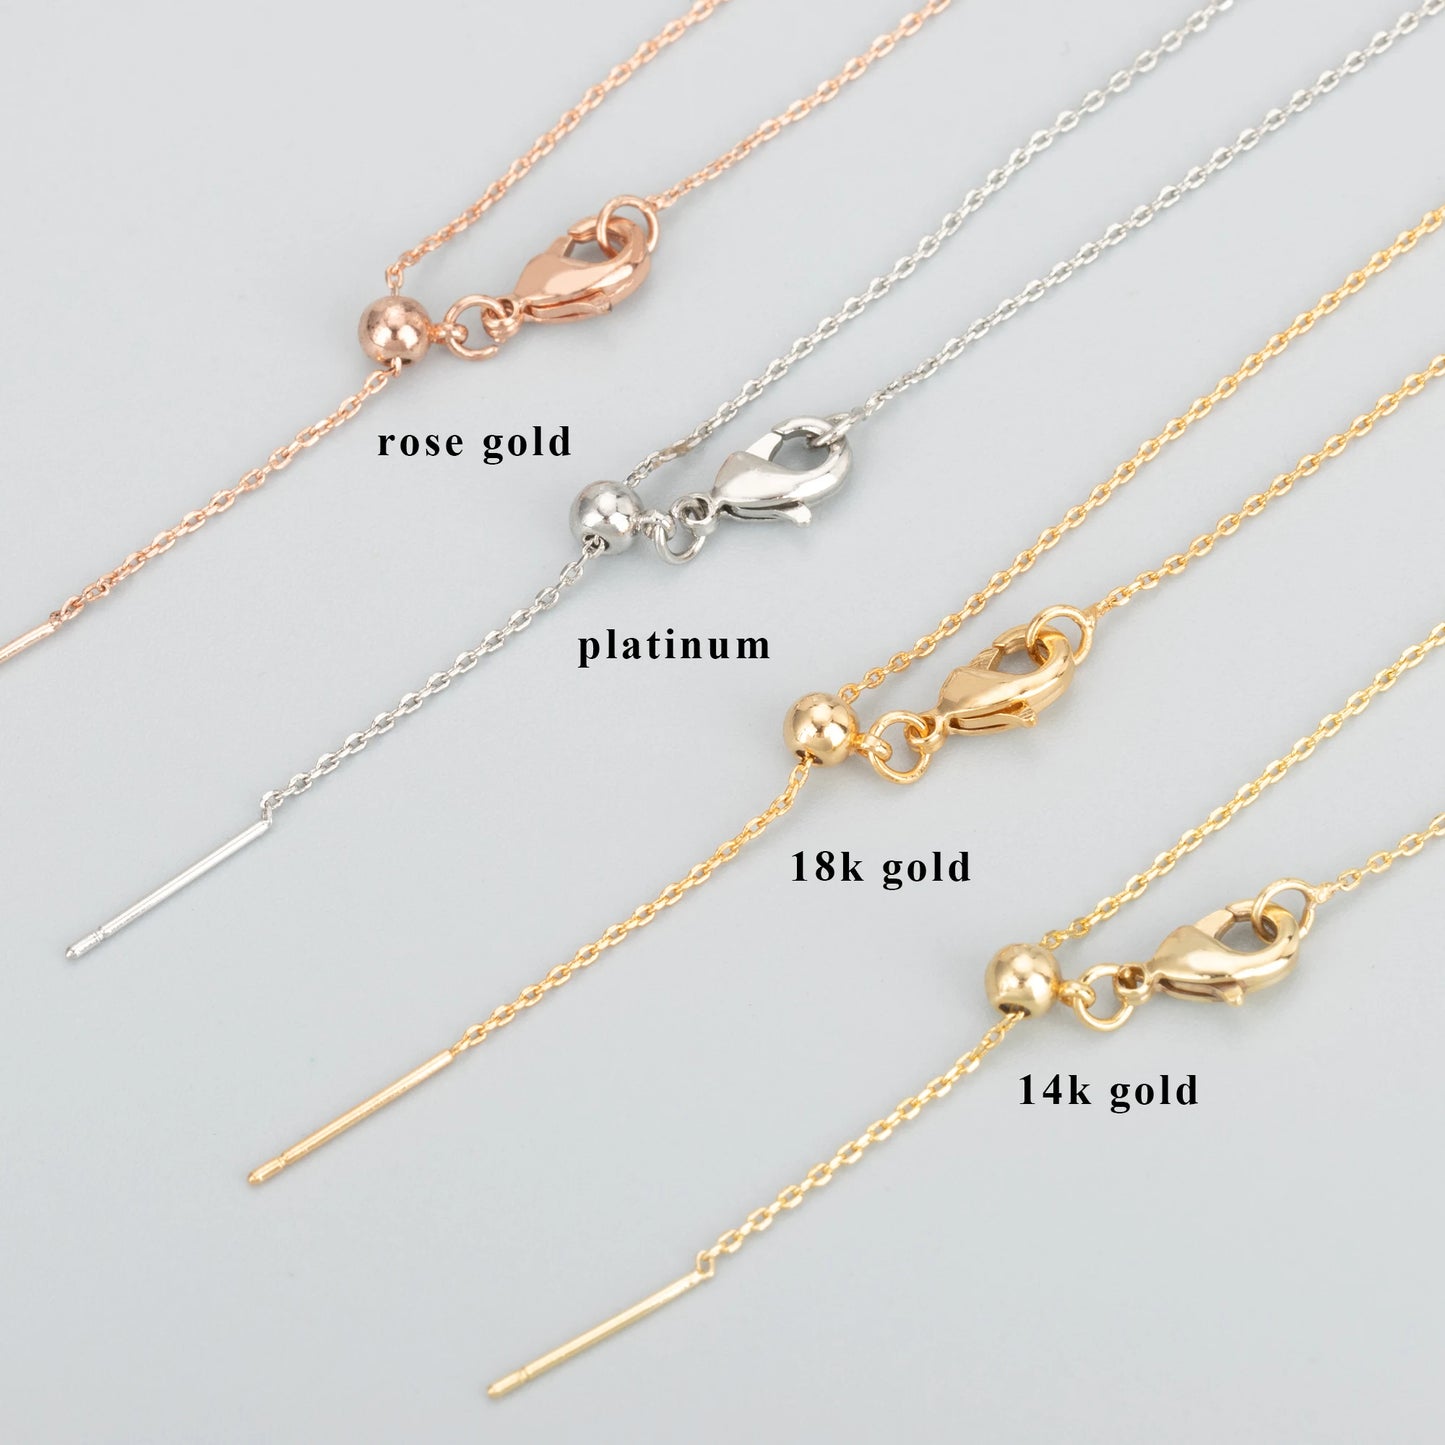 GUFEATHER MB25,fashion thin necklace,nickel free,18k gold rhodium plated,mash up necklace,long necklace diy chain,6pcs/lot